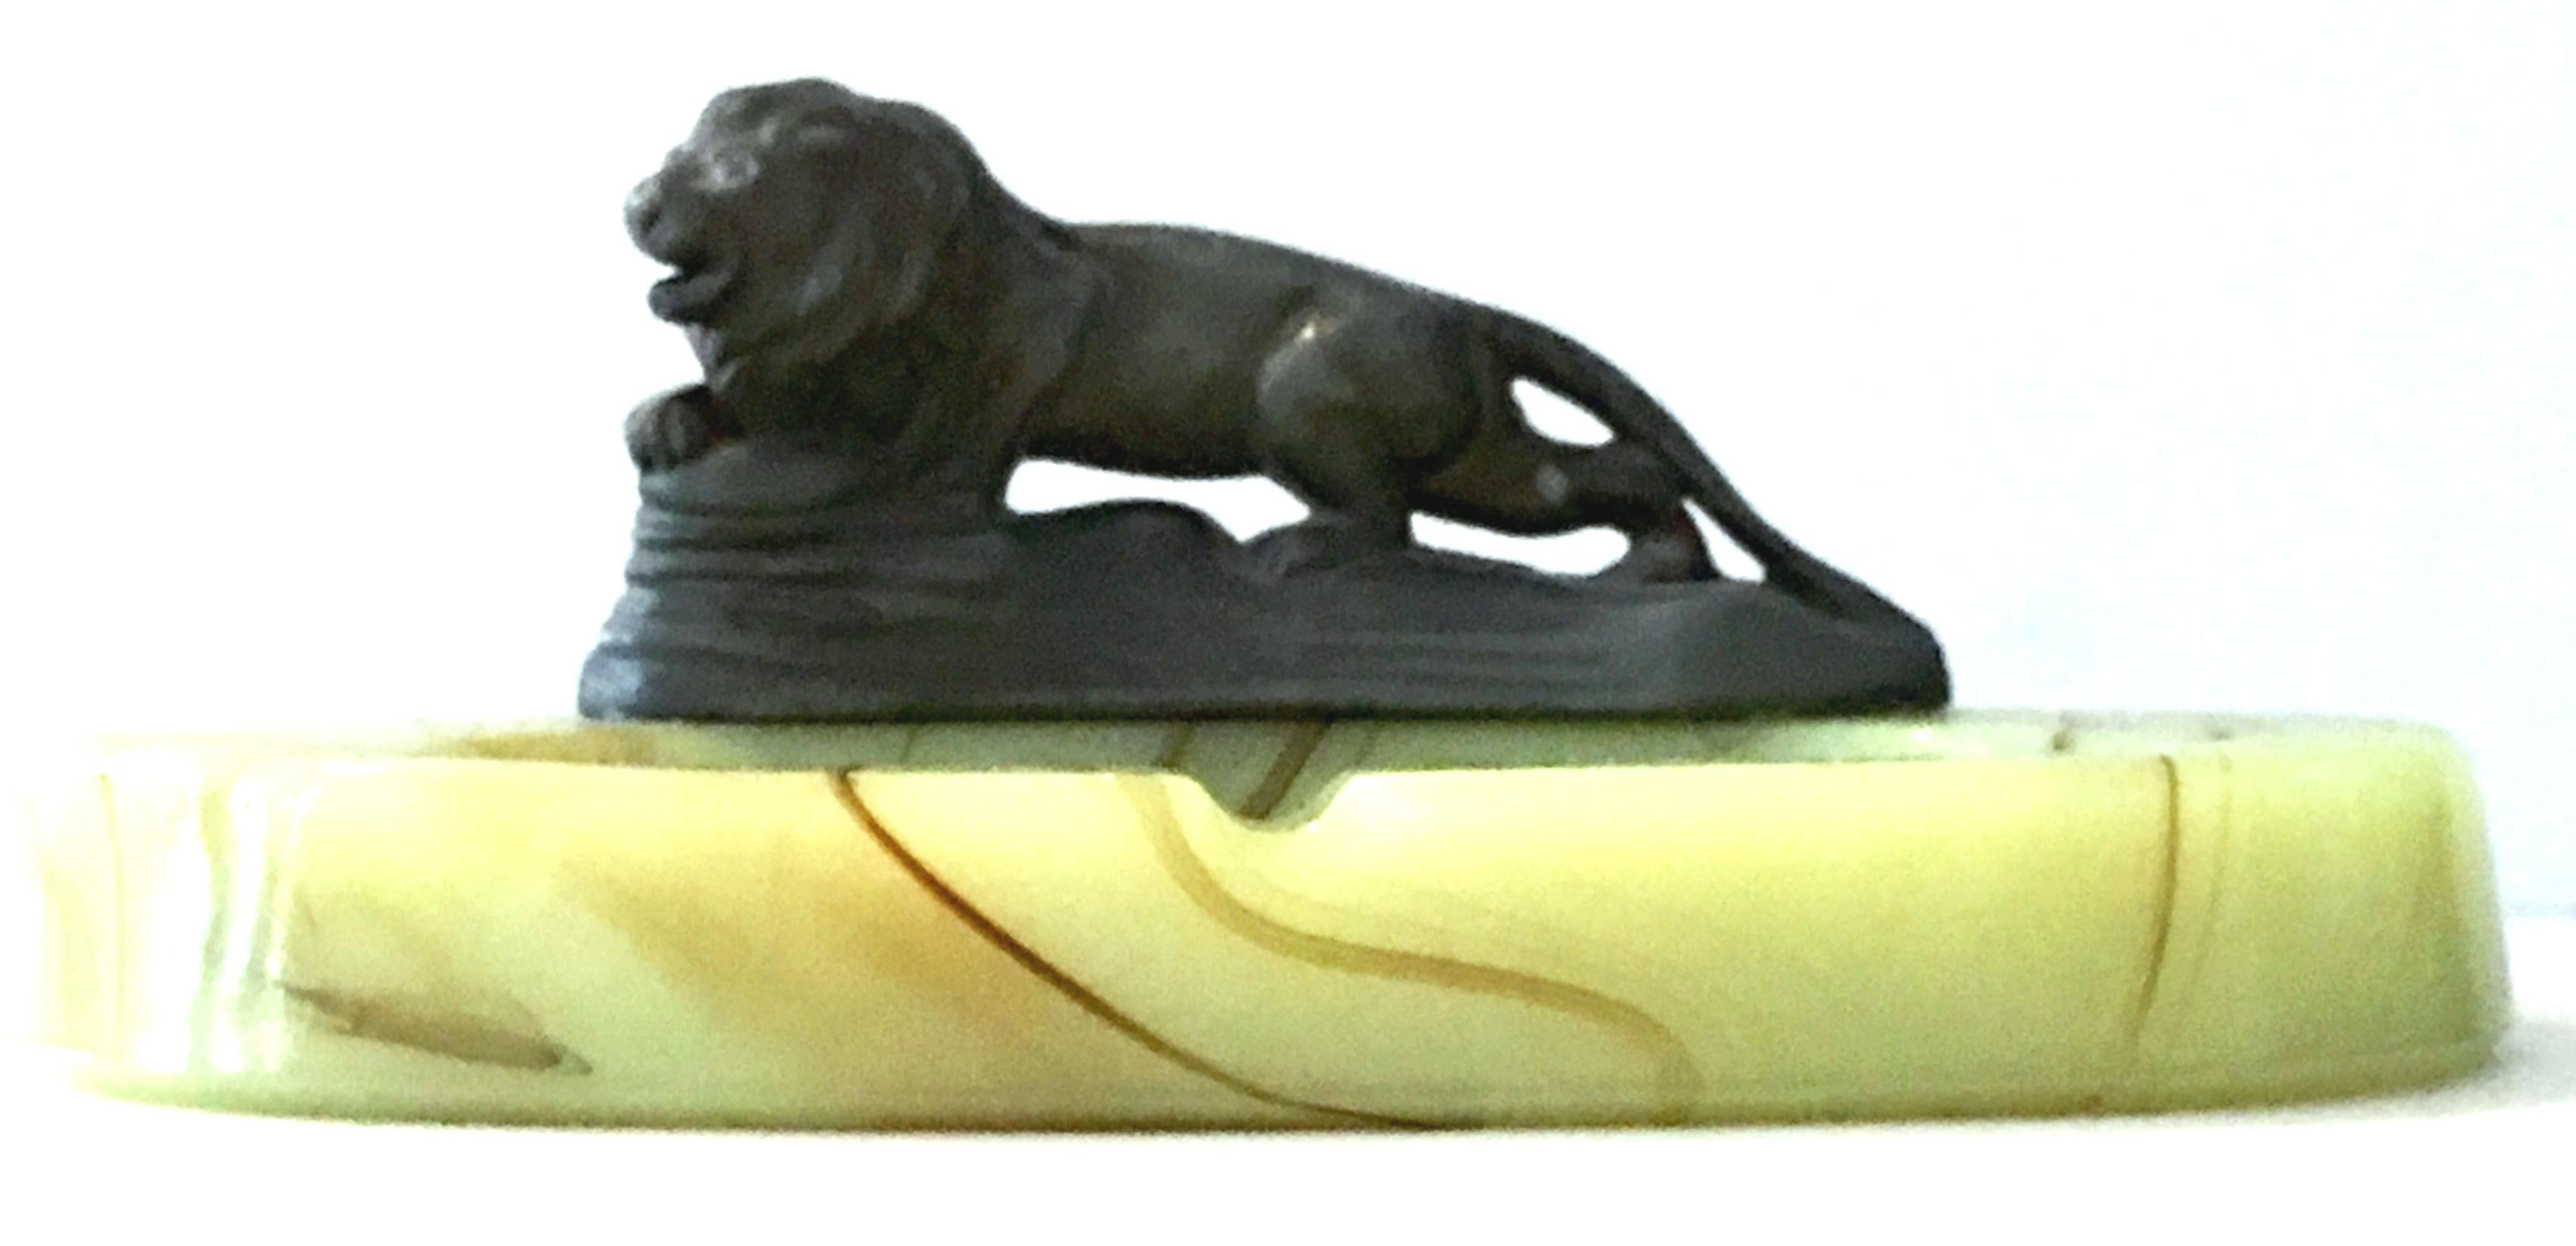 1920'S Art Deco bronze lion sculpture atop a oval green onyx catchall ashtray.